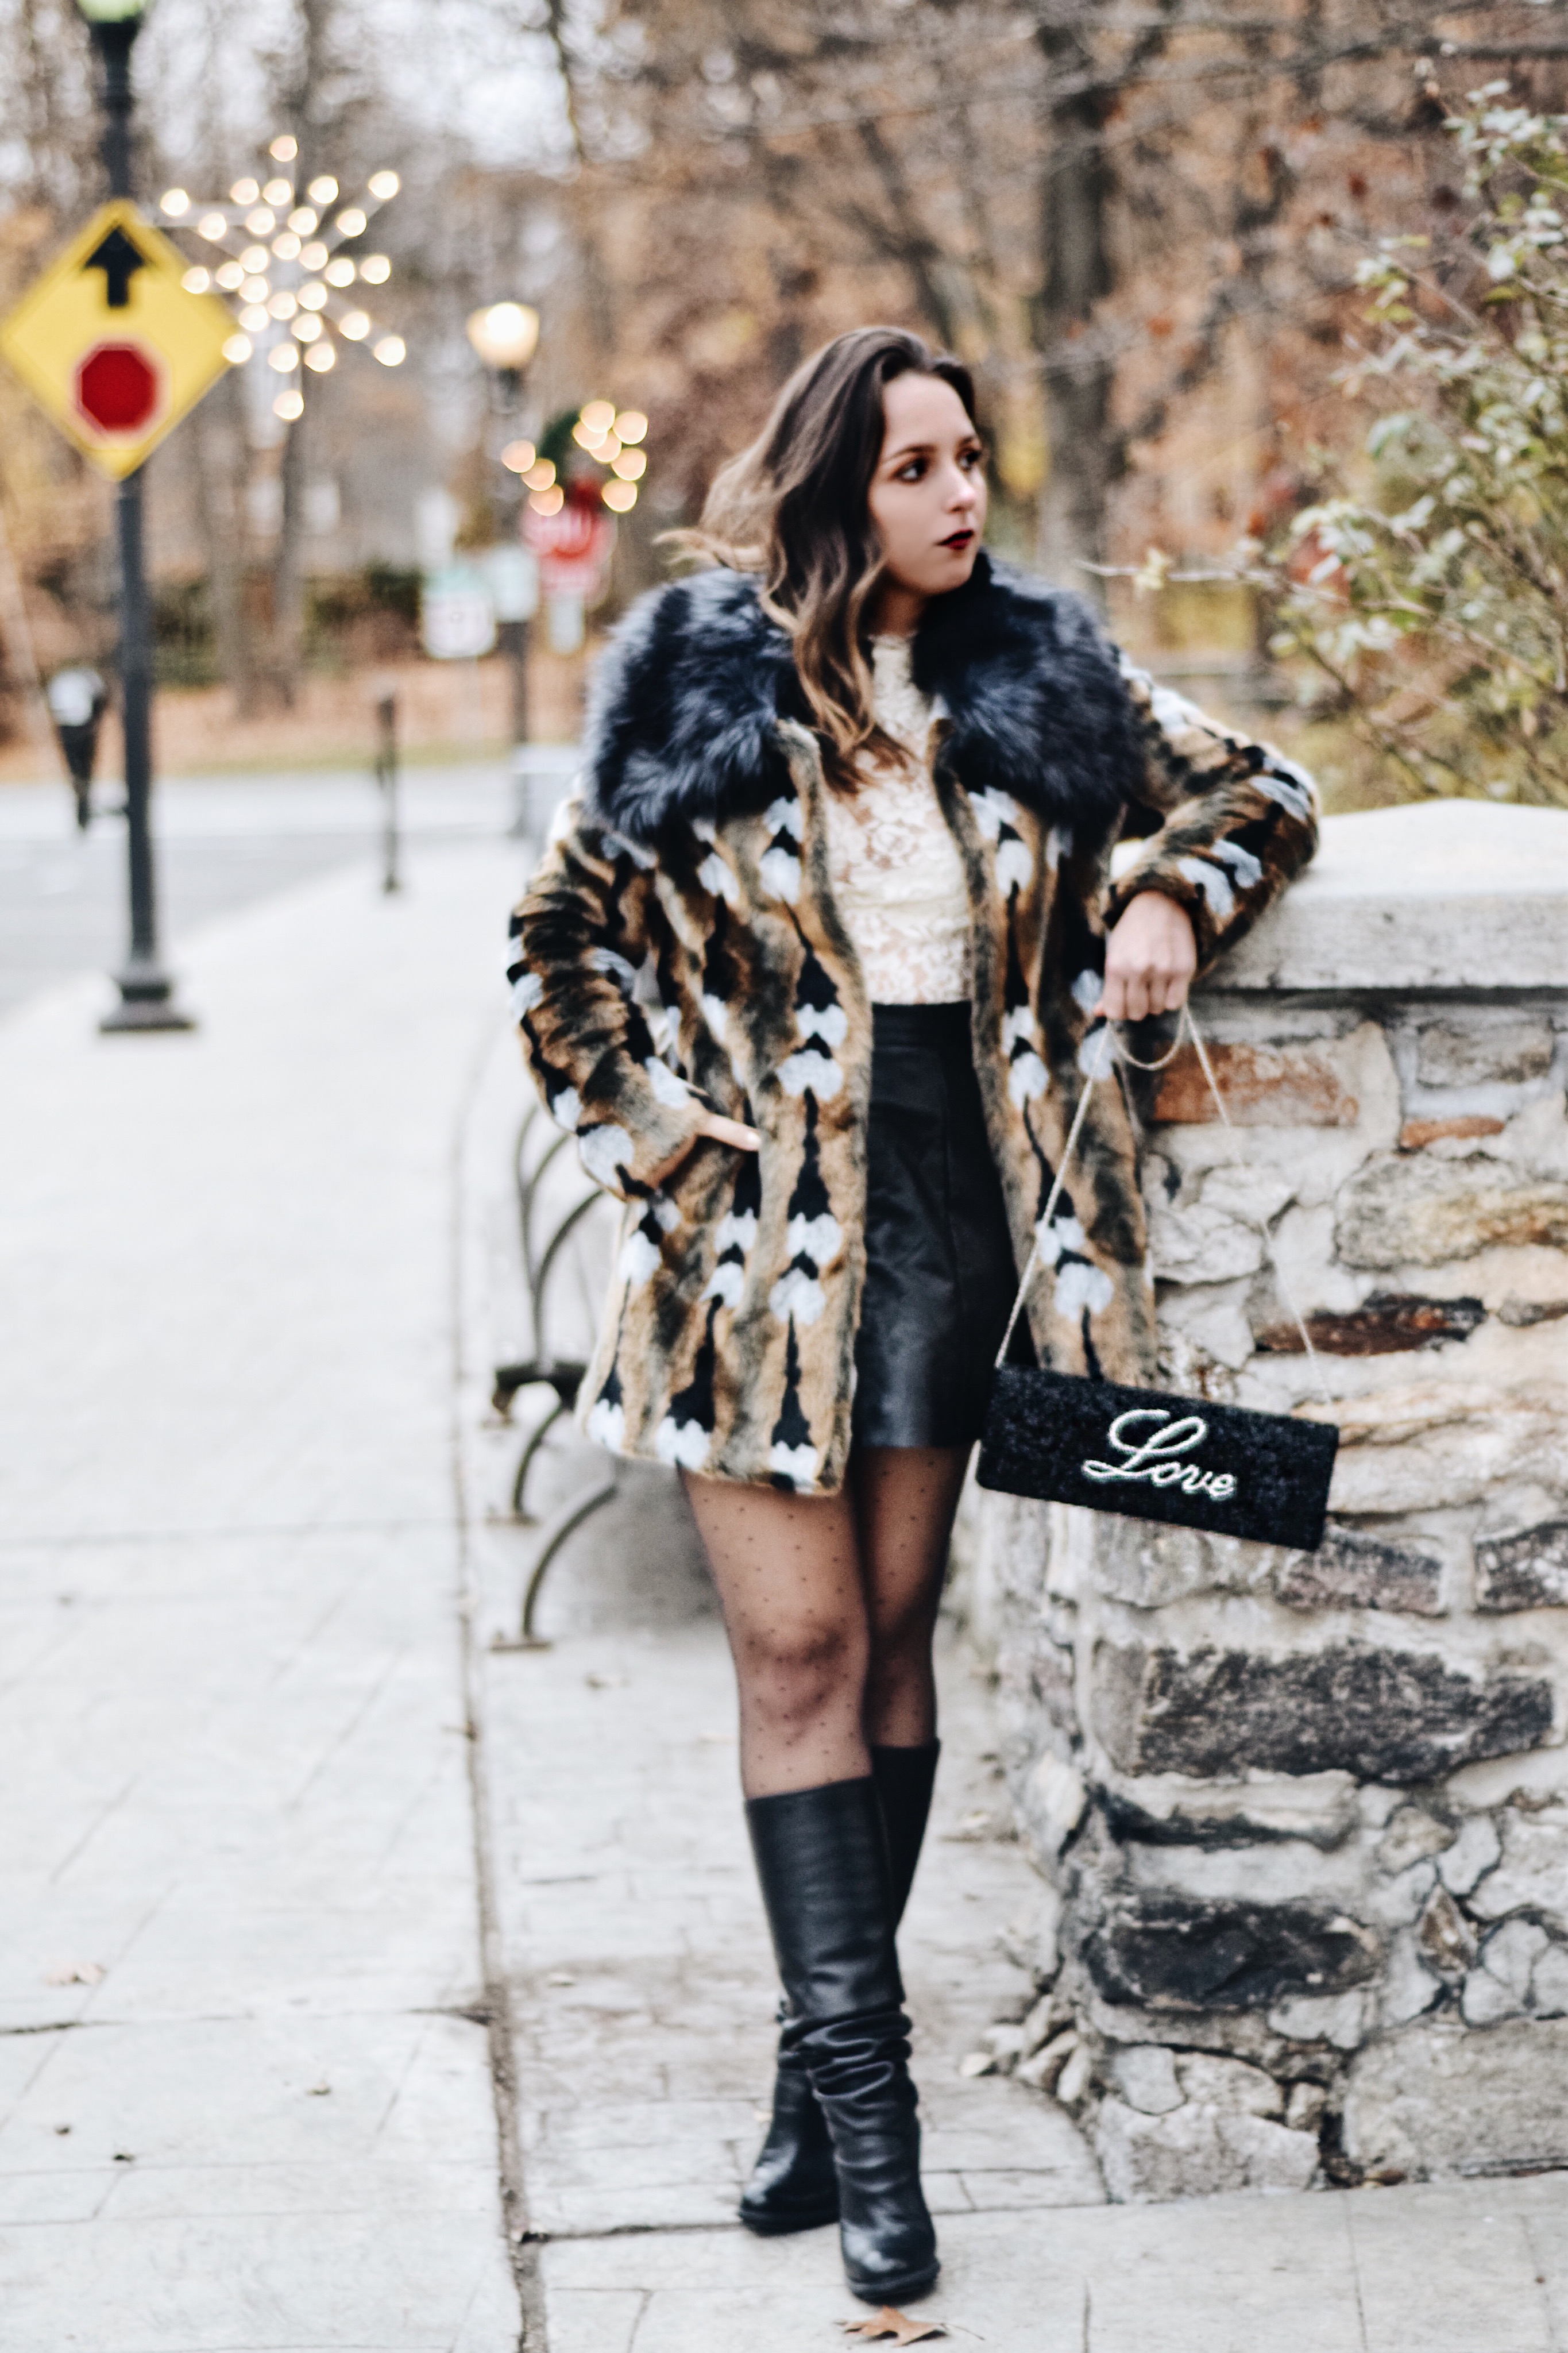 island to east side-clutch-unreal fur-style-outfit-blogger-love clutch-beaded-lace-new york